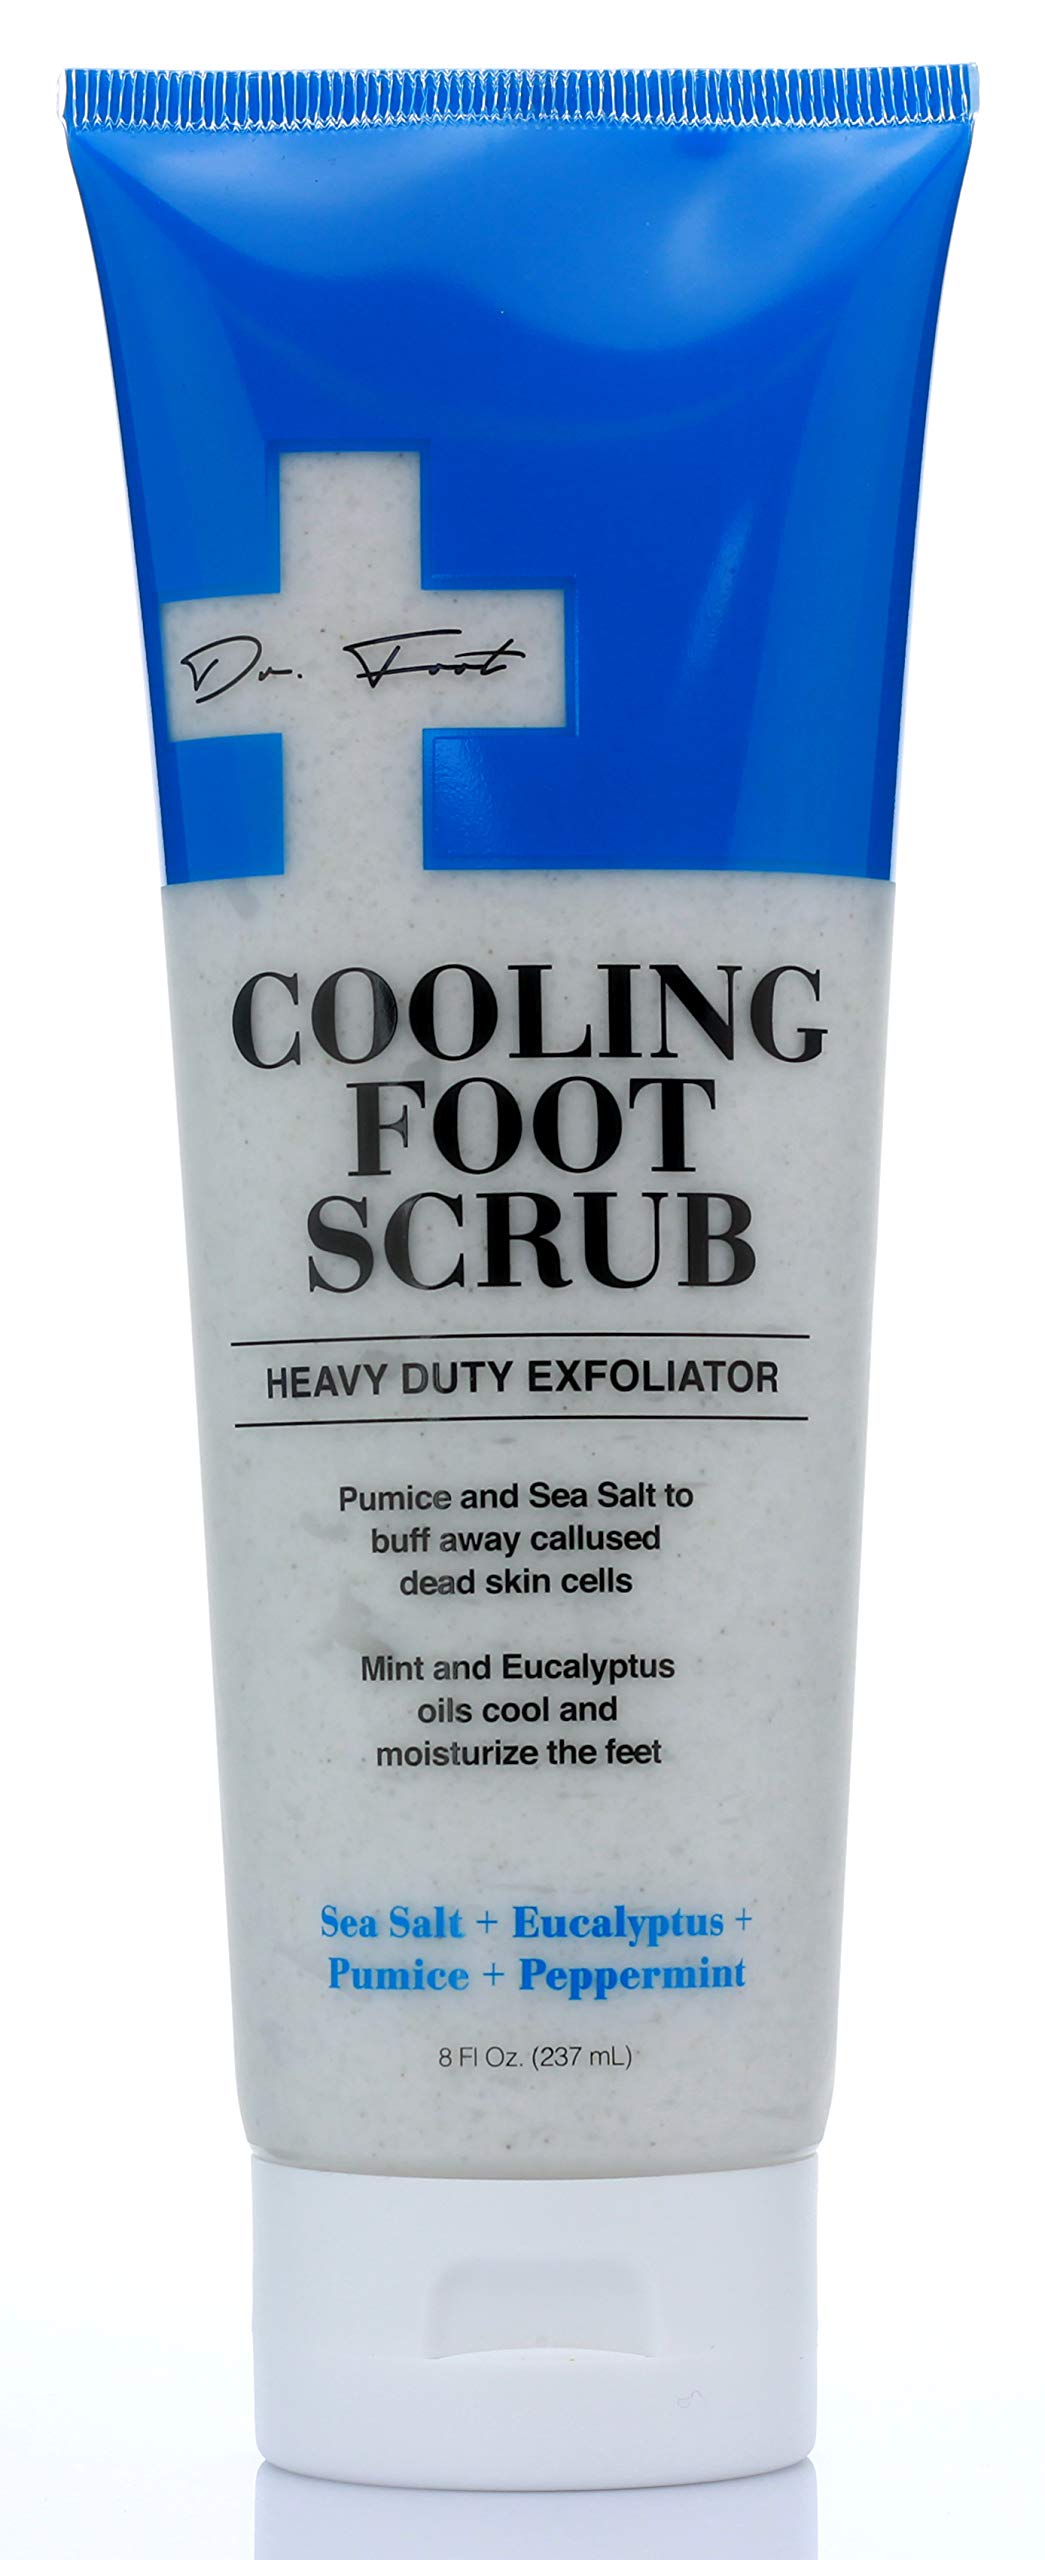 RED by Kiss Foot Scrub for Dead Skin – Exfoliates, Moisturizes, Nourishes  Dry and Cracked Heels, Use with Foot Scrubber for Pedicure 5.3 oz.